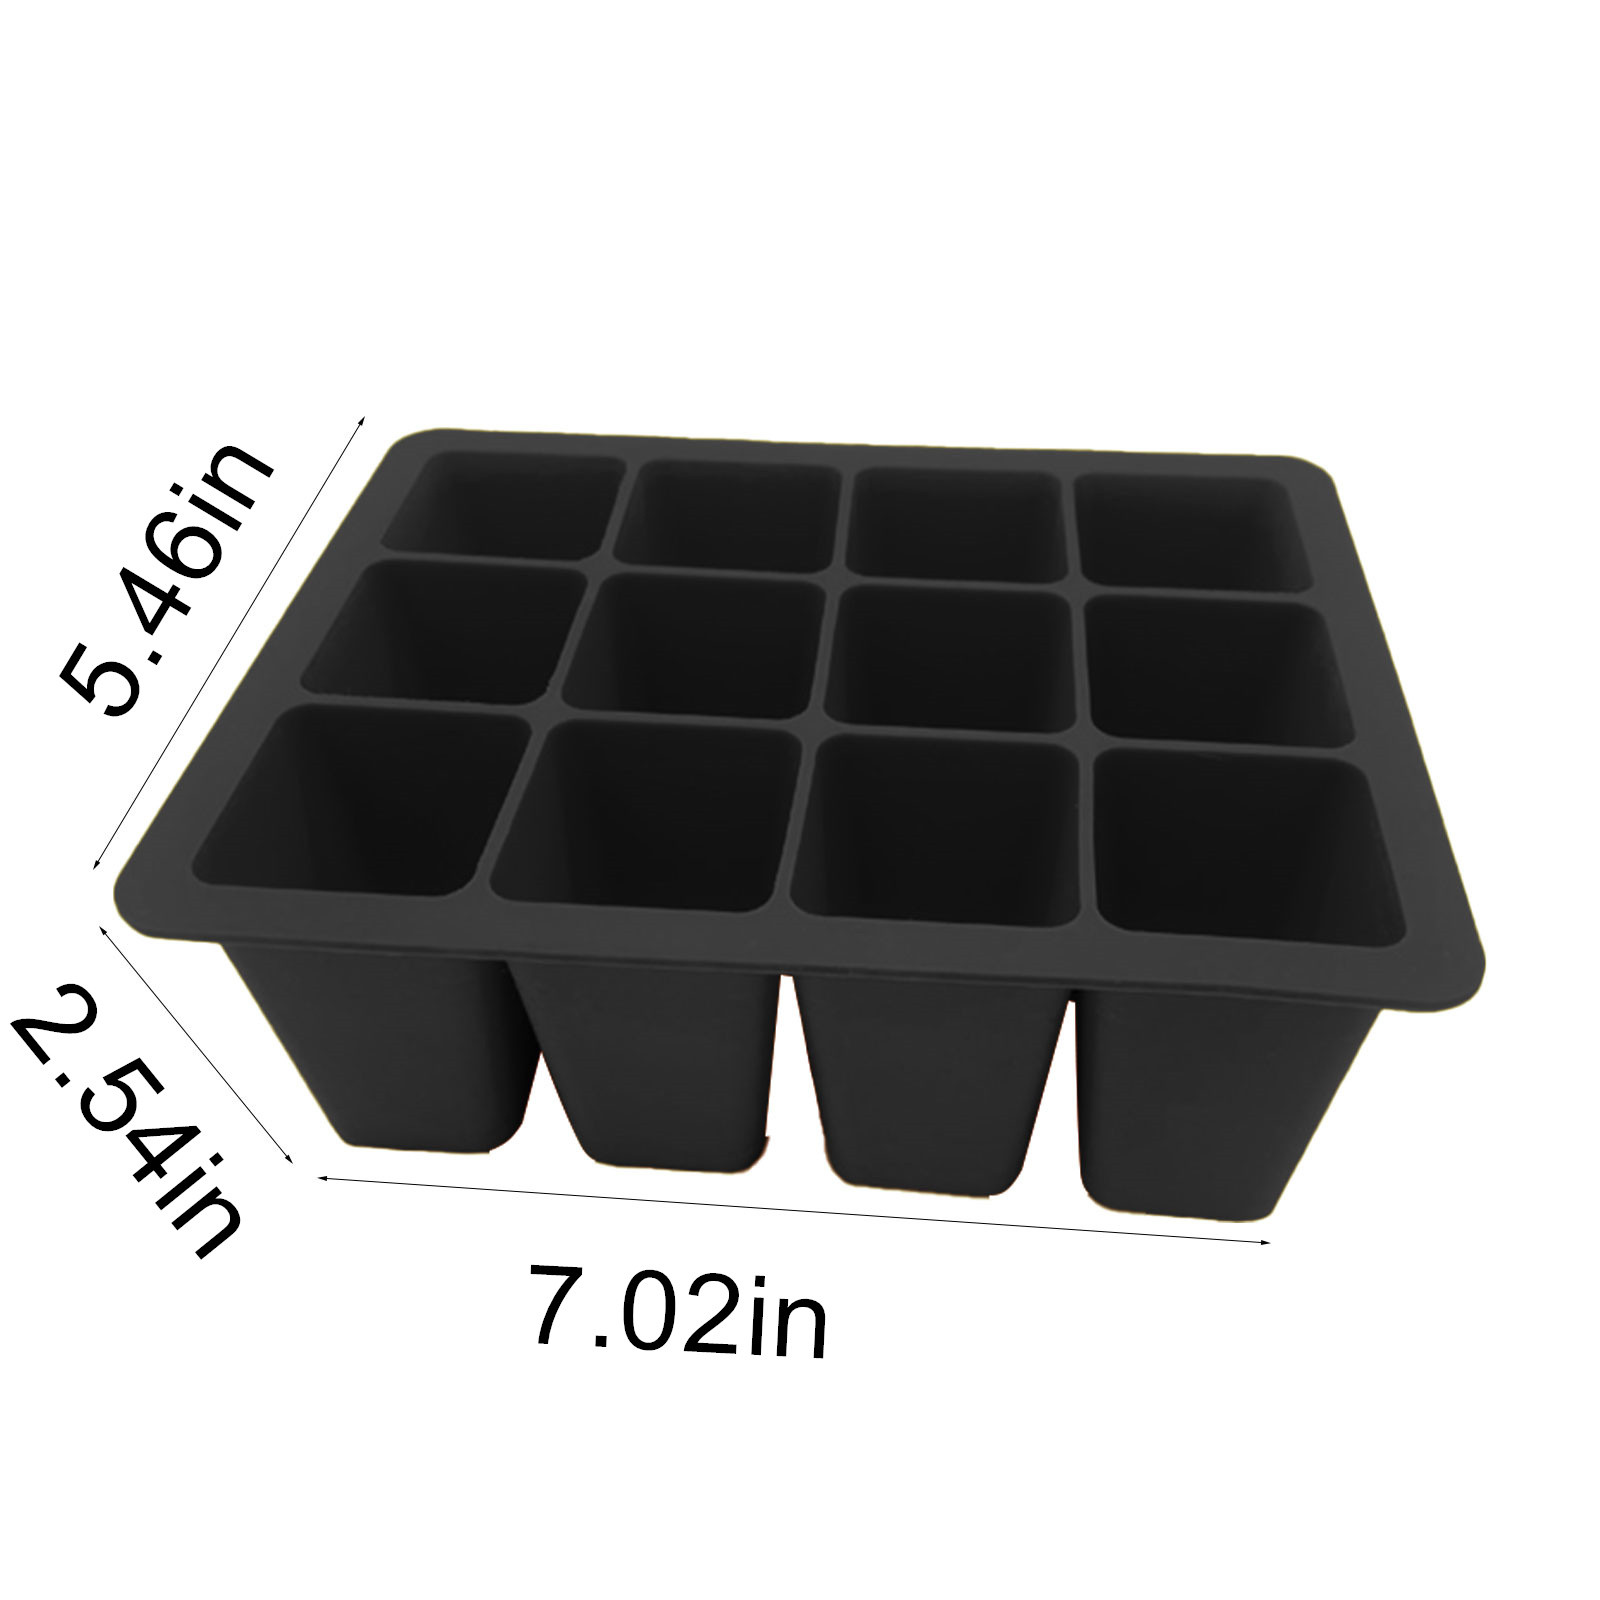 Switching over to Silicone Seed Trays! #strongerroots #gardentok